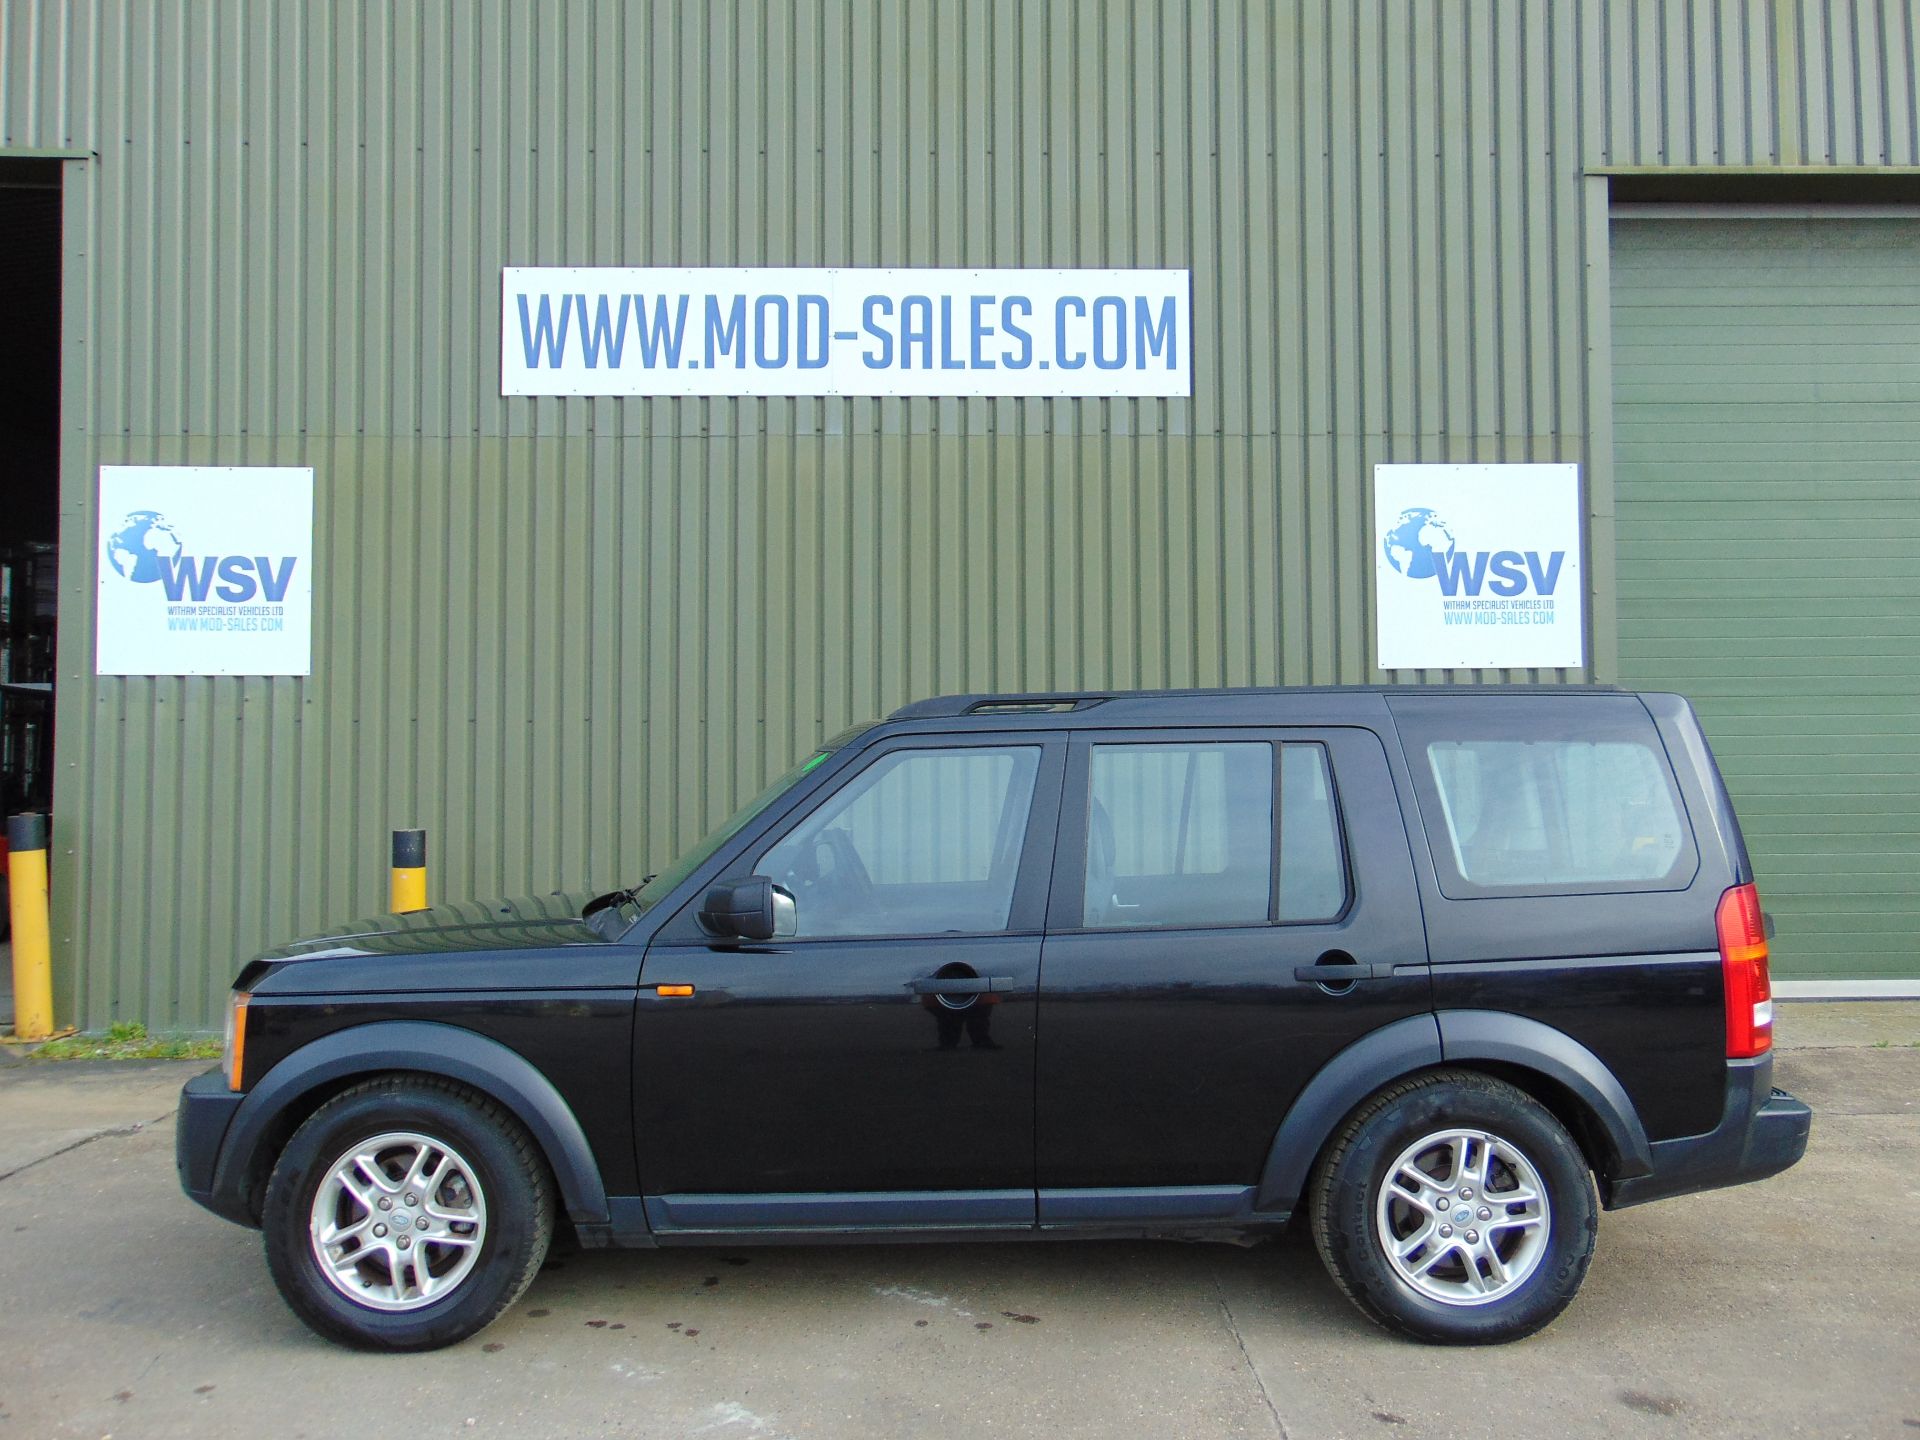 2006 Land Rover Discovery 3 TDV6 2.7 Ltr Auto - 4WD - 5 dr 7 Seater - Black - Image 2 of 49